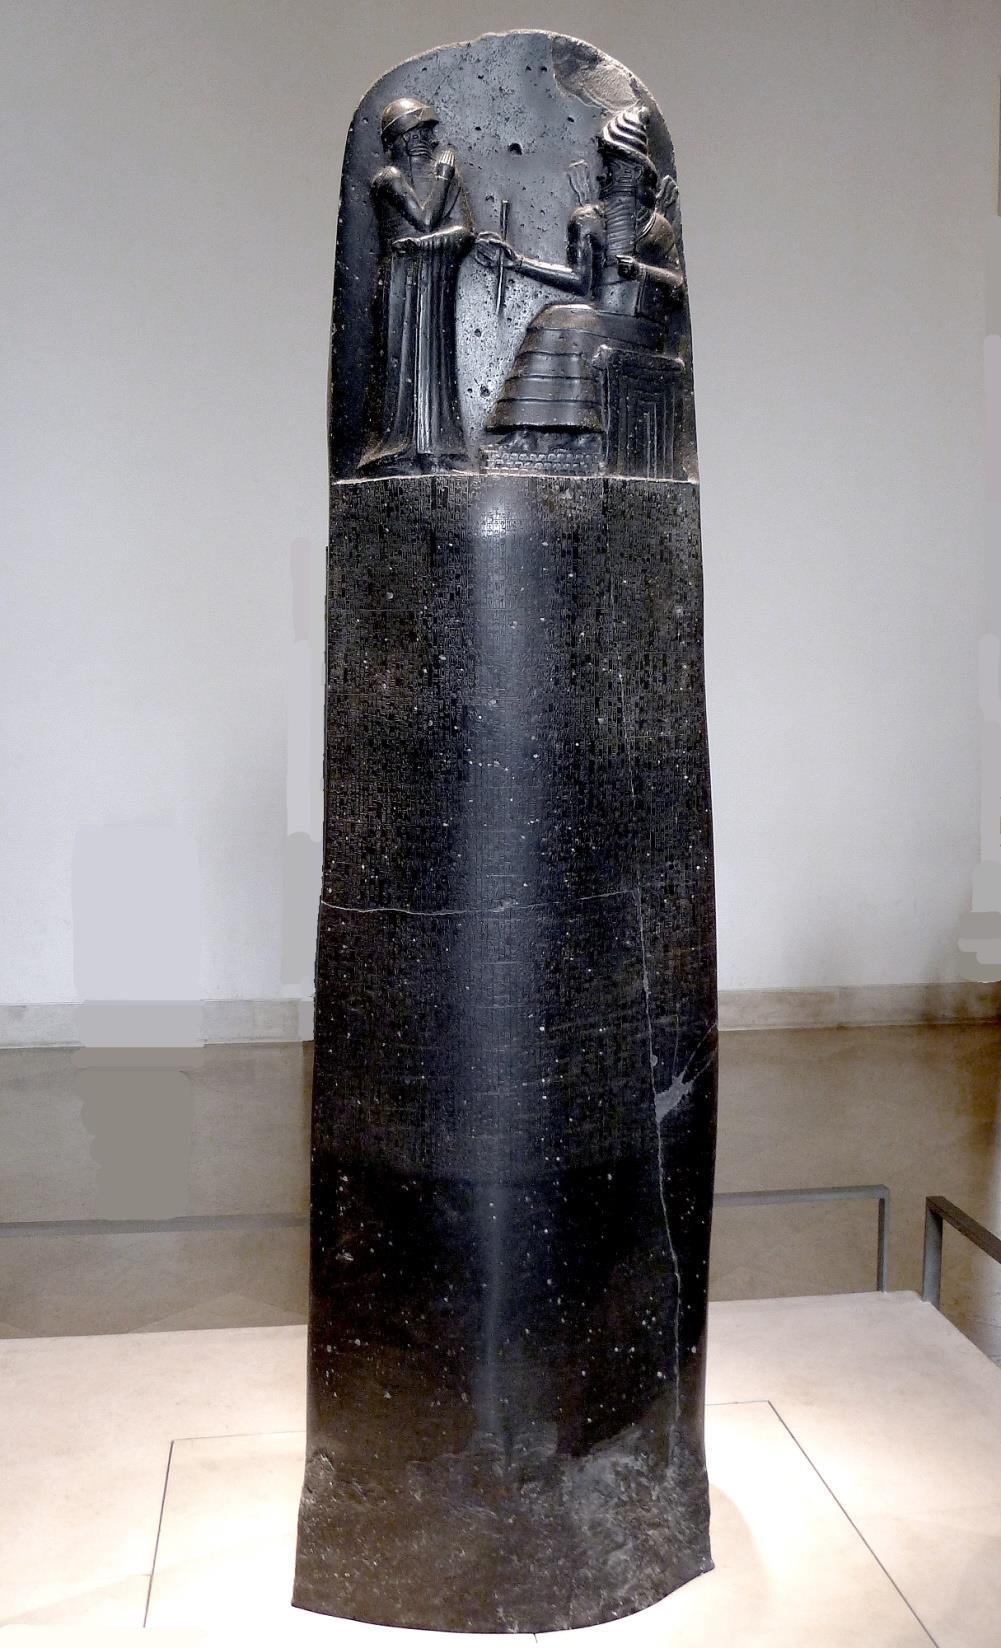 His horned helmet usually was reserved for the gods. The Akkadians adopted the Sumerian style in their stele. One of the most famous stele is Hammurabi s Law Code.